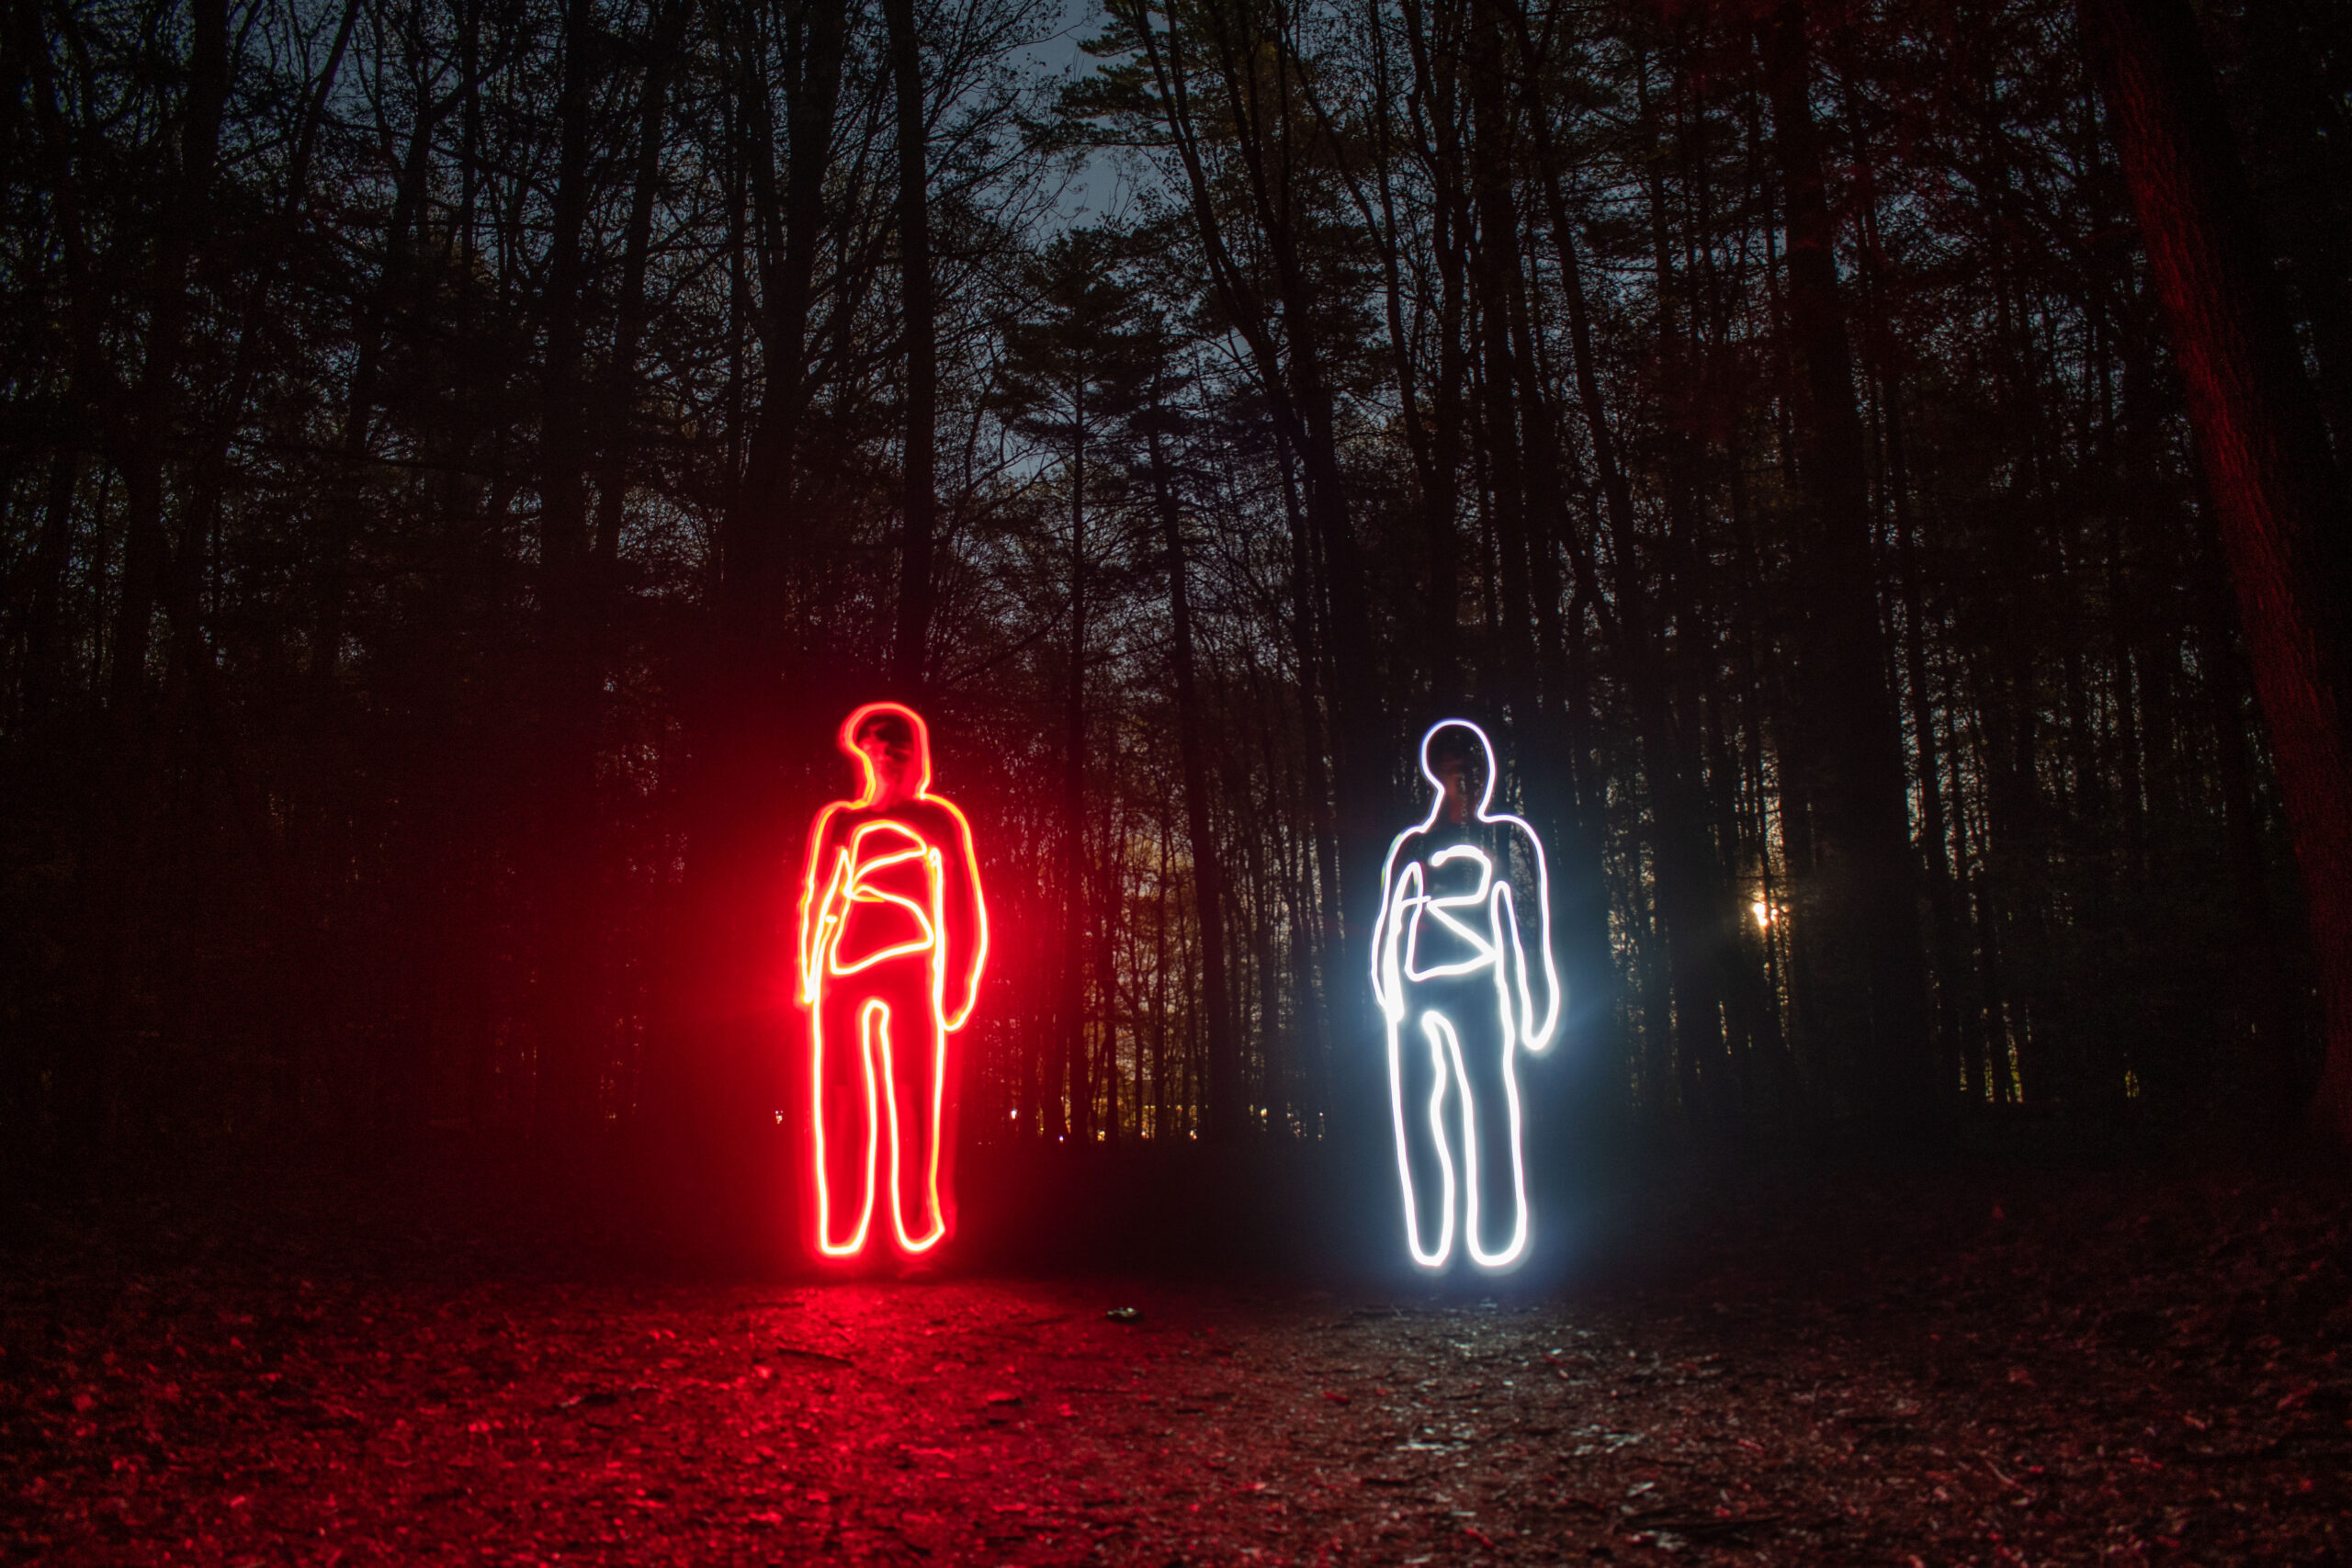 A long exposure photo with two figures drawn in red and white lights.